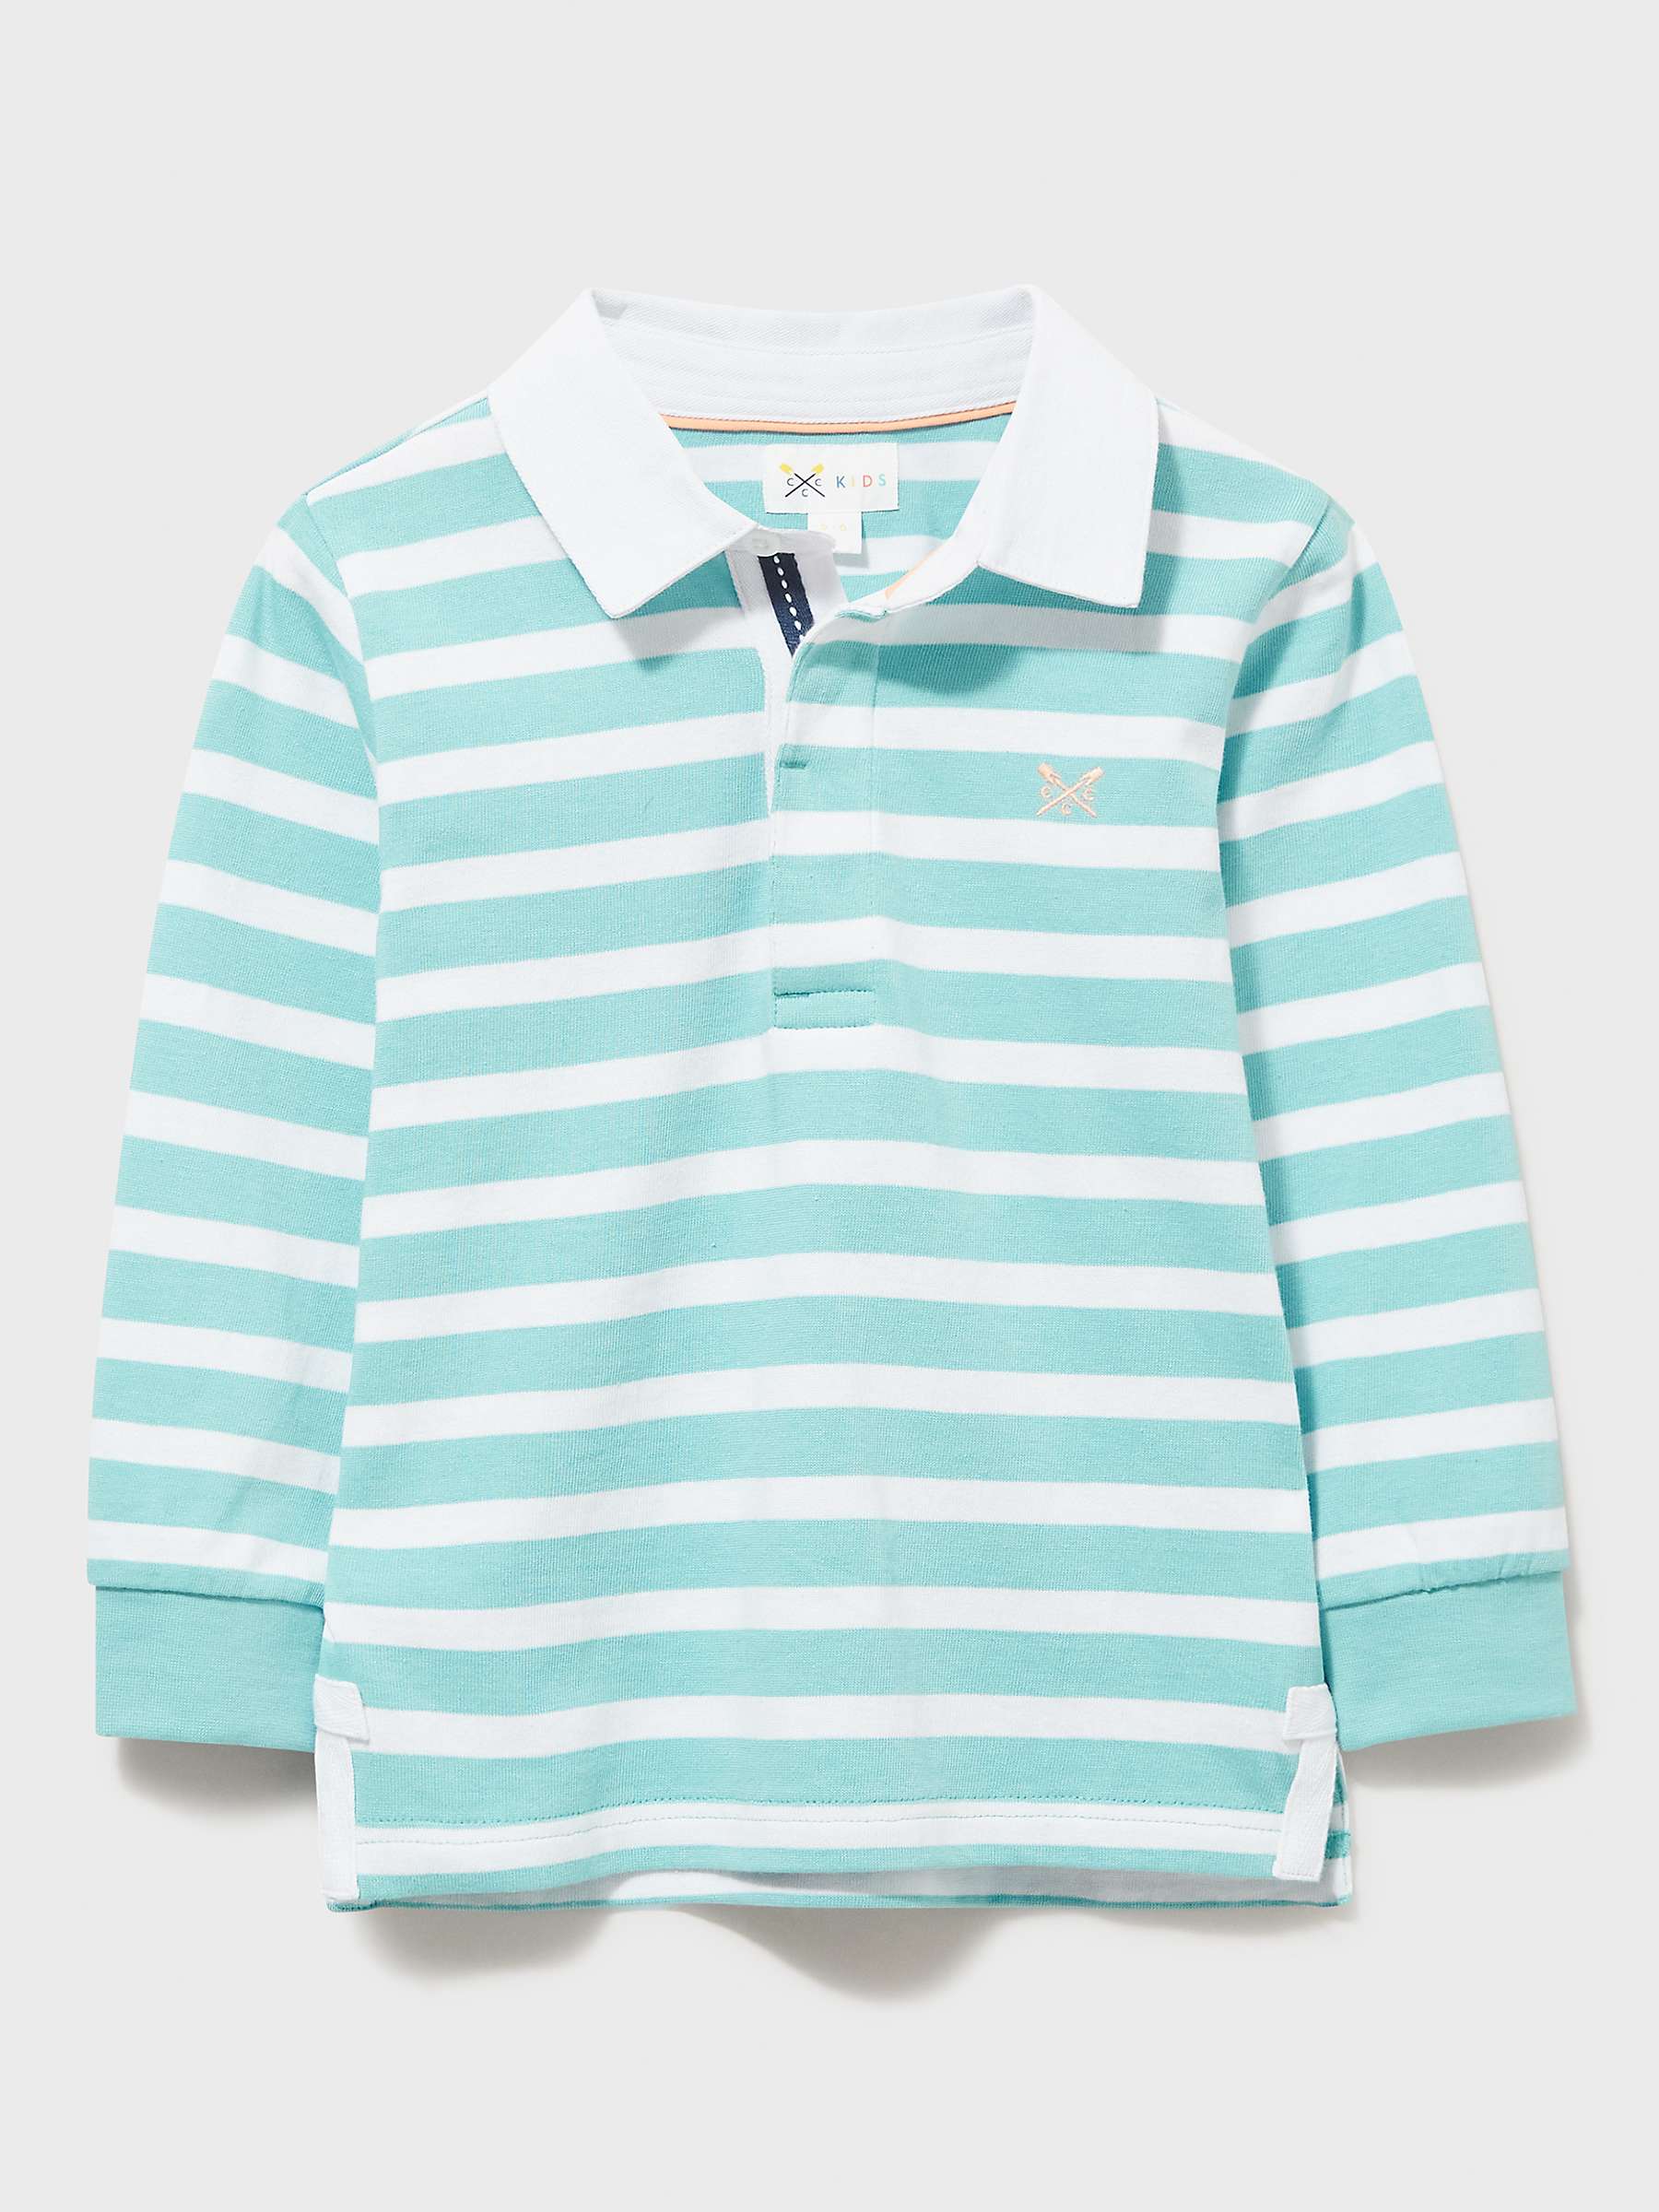 Crew Clothing Kids' Stripe Long Sleeve Rugby Shirt, Turquoise/White at ...